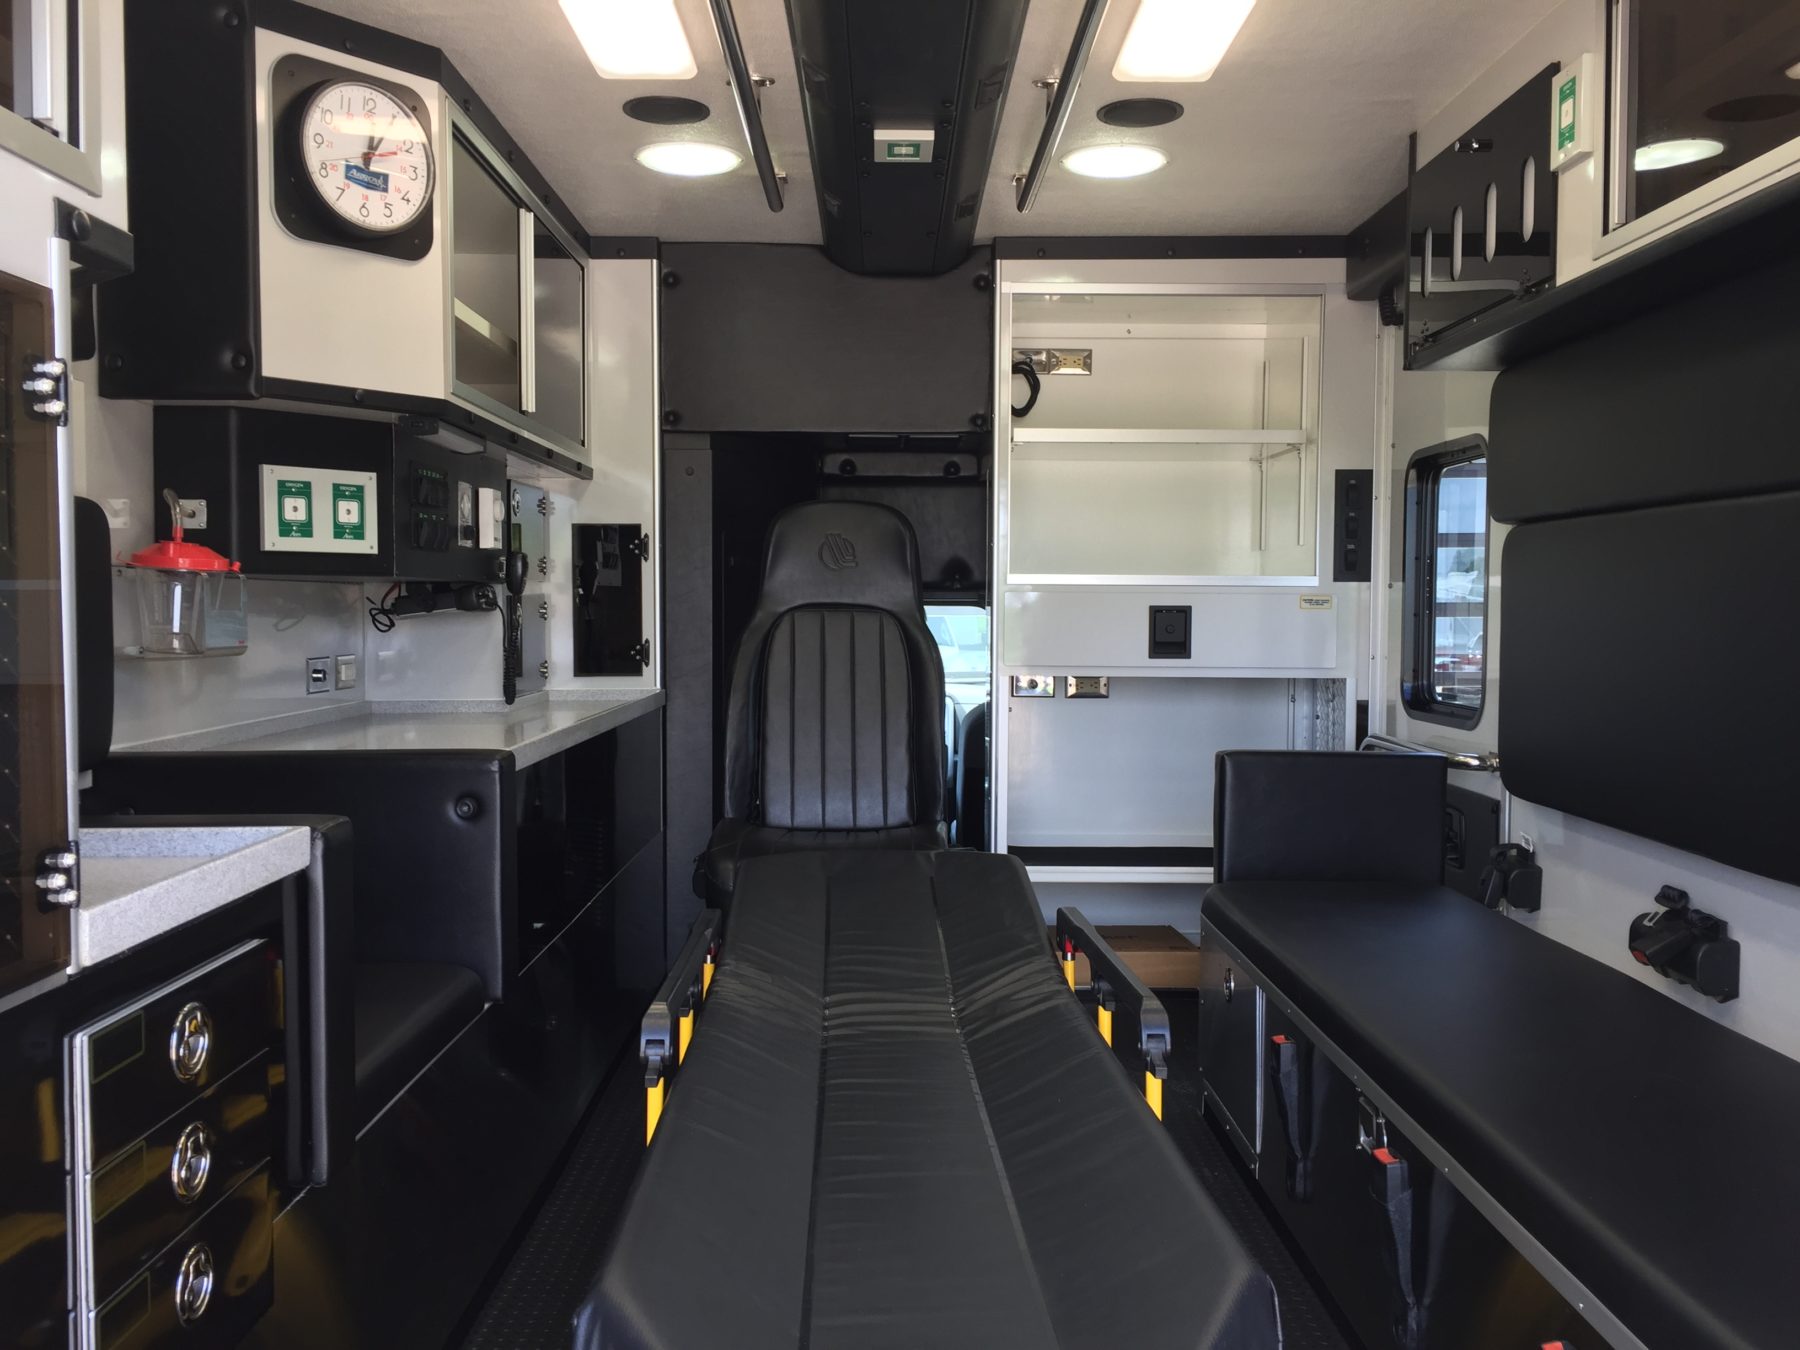 2017 Ram 4500 4x4 Heavy Duty Ambulance For Sale – Picture 2